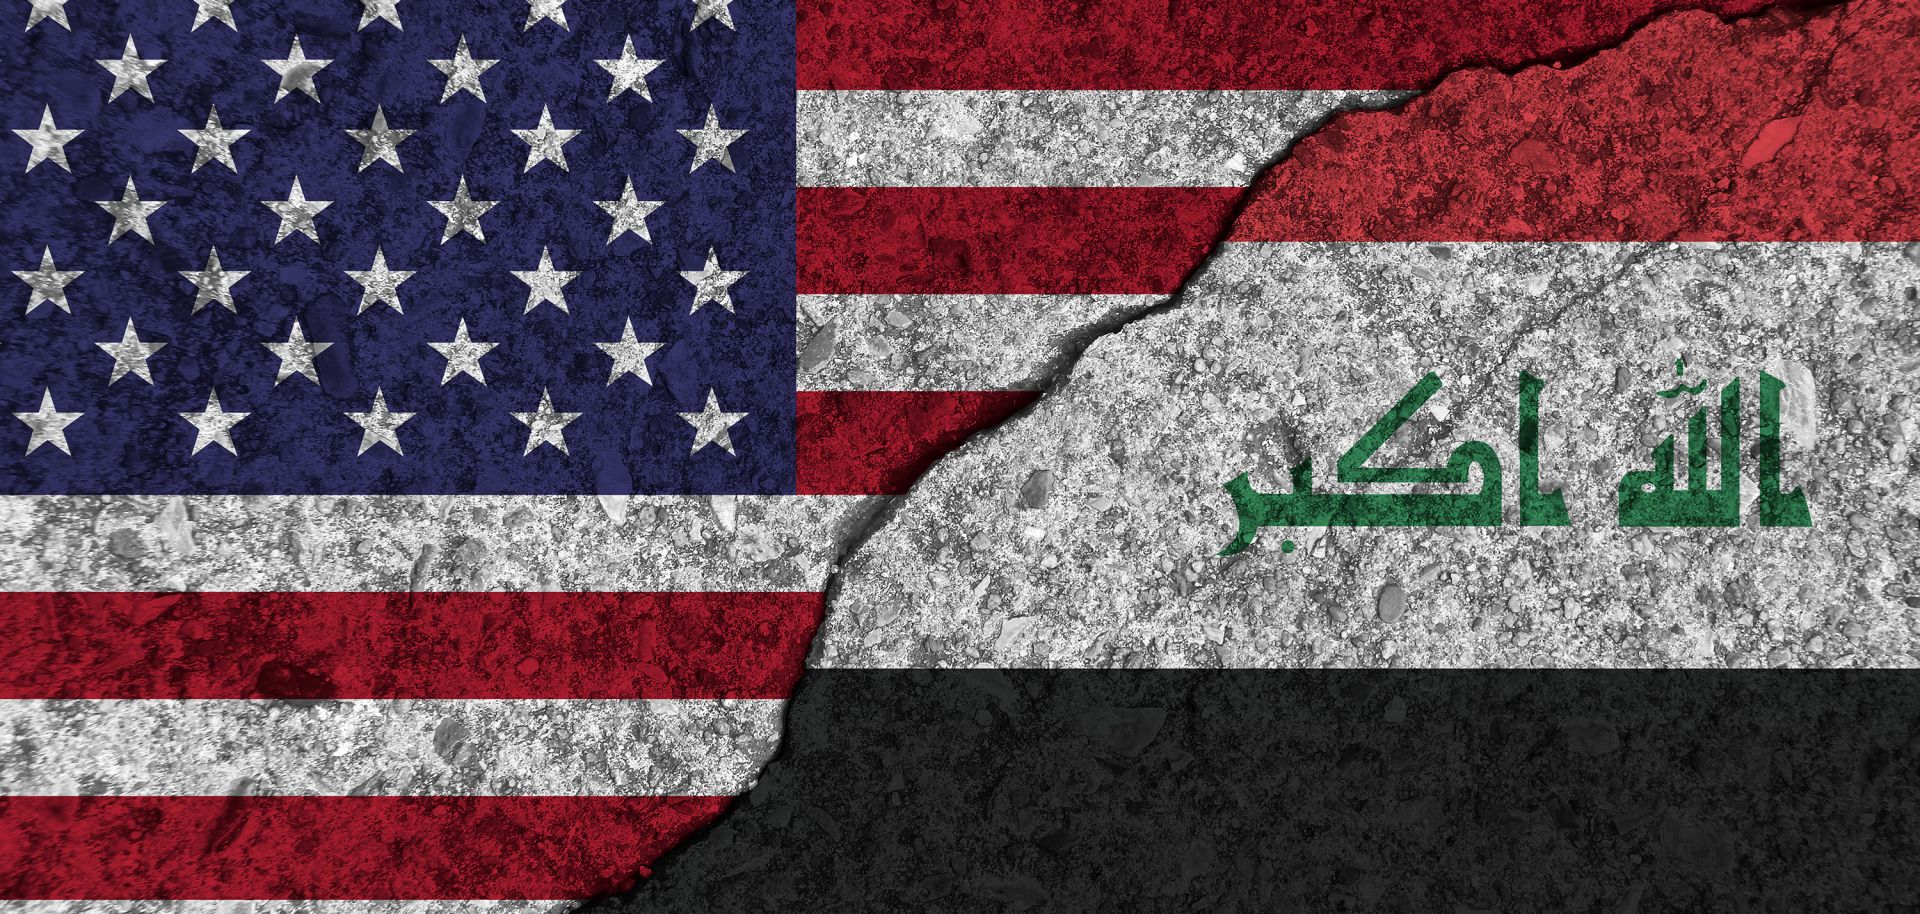 An image of cracked, painted picture of the U.S. and Iraqi flags illustrates the two countries' decaying relationship due to Washington's ongoing pressure campaign and proxy battle against Iran.  